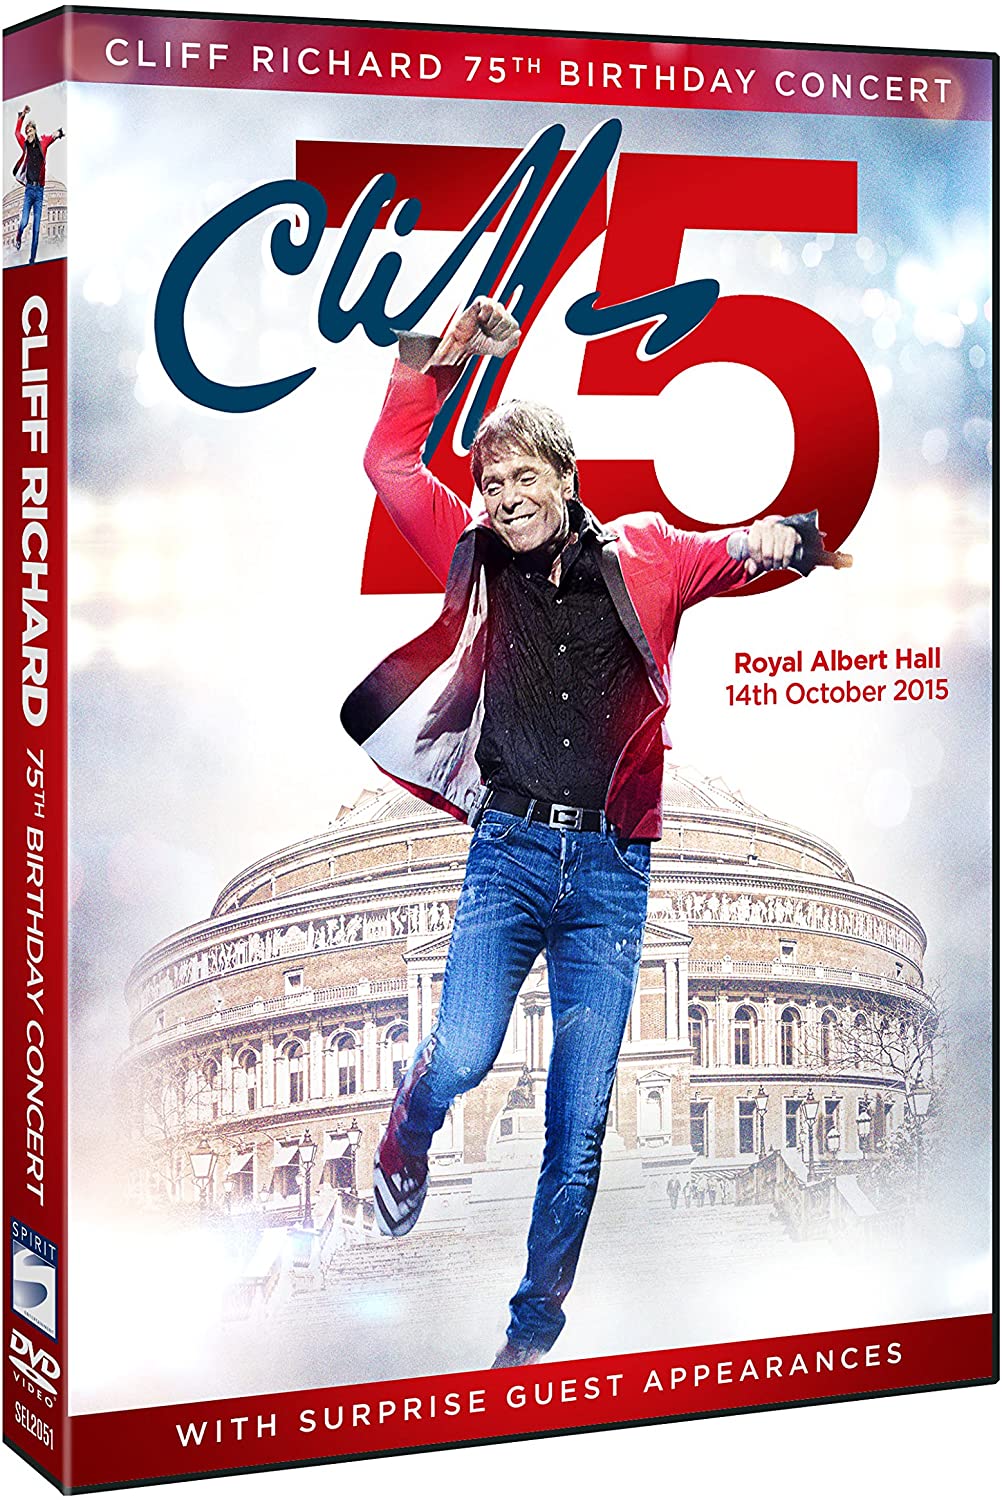 Cliff Richard's 75th Birthday Concert Performed at The Royal Albert Hall [DVD]